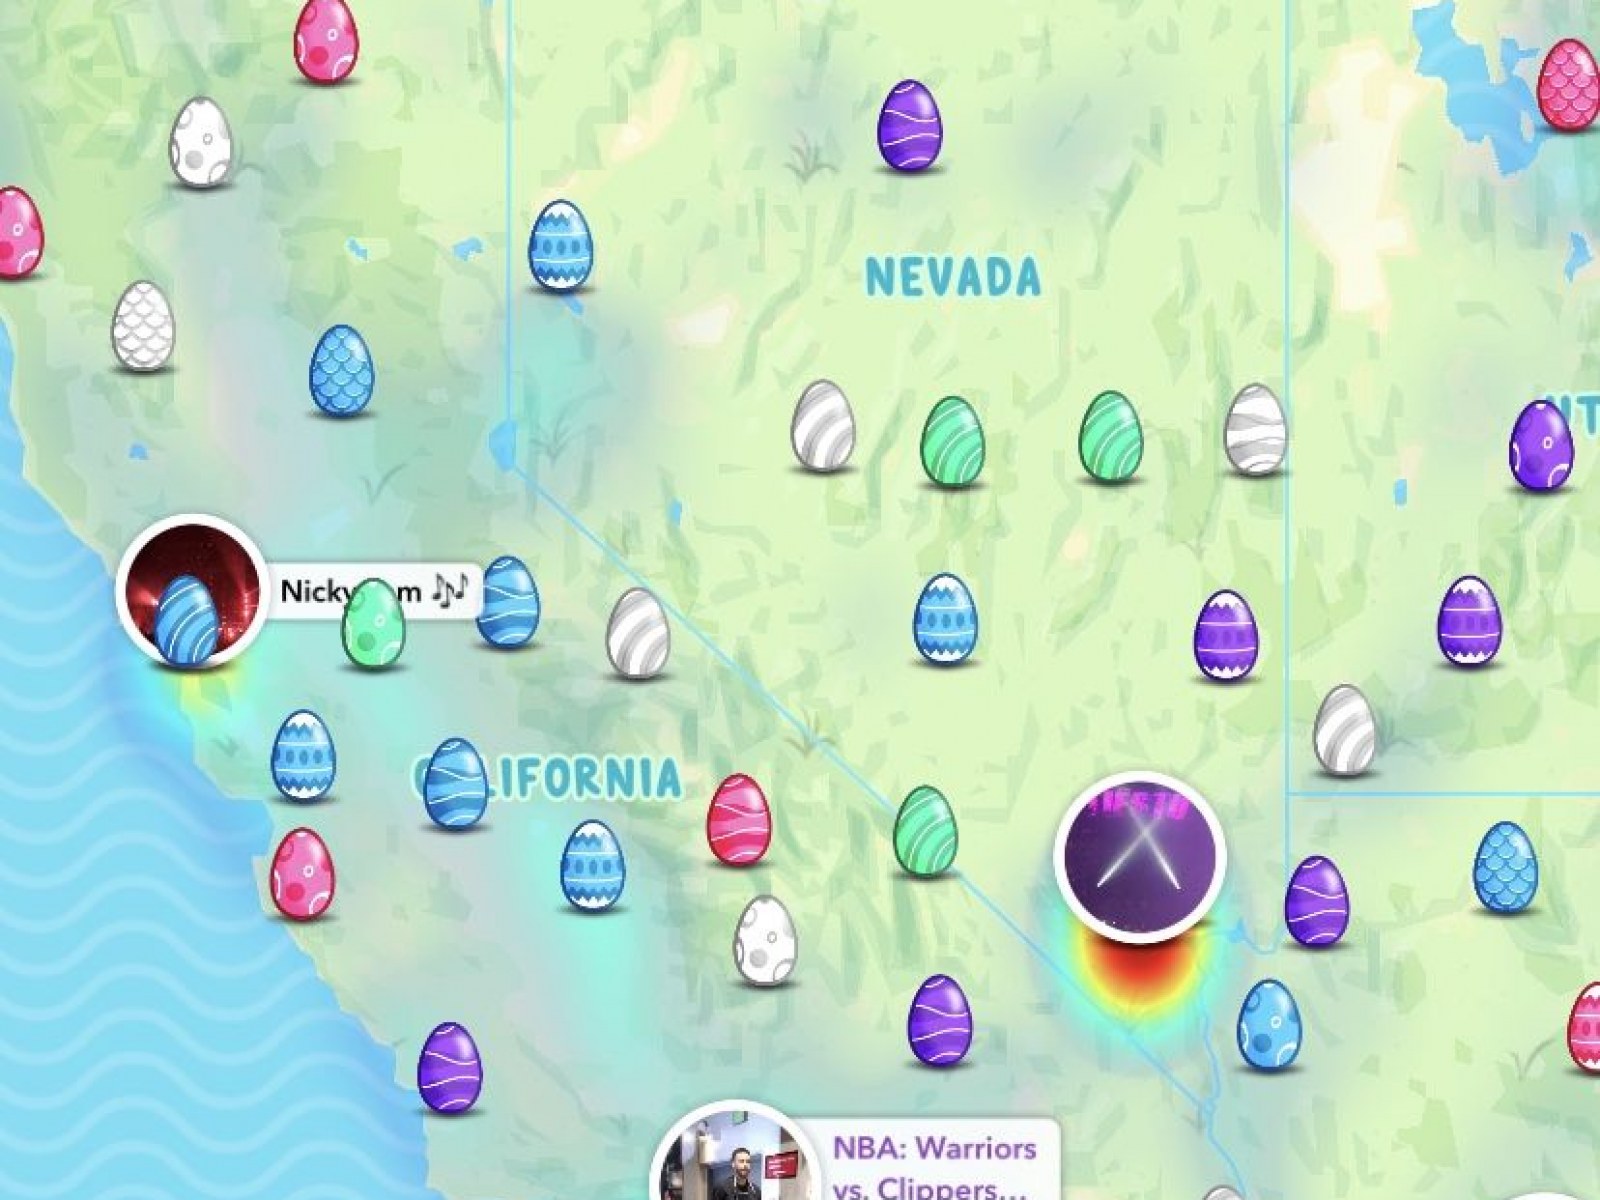 💖 Snap a shot of 2+ eggies under the mistletoe in our maps and